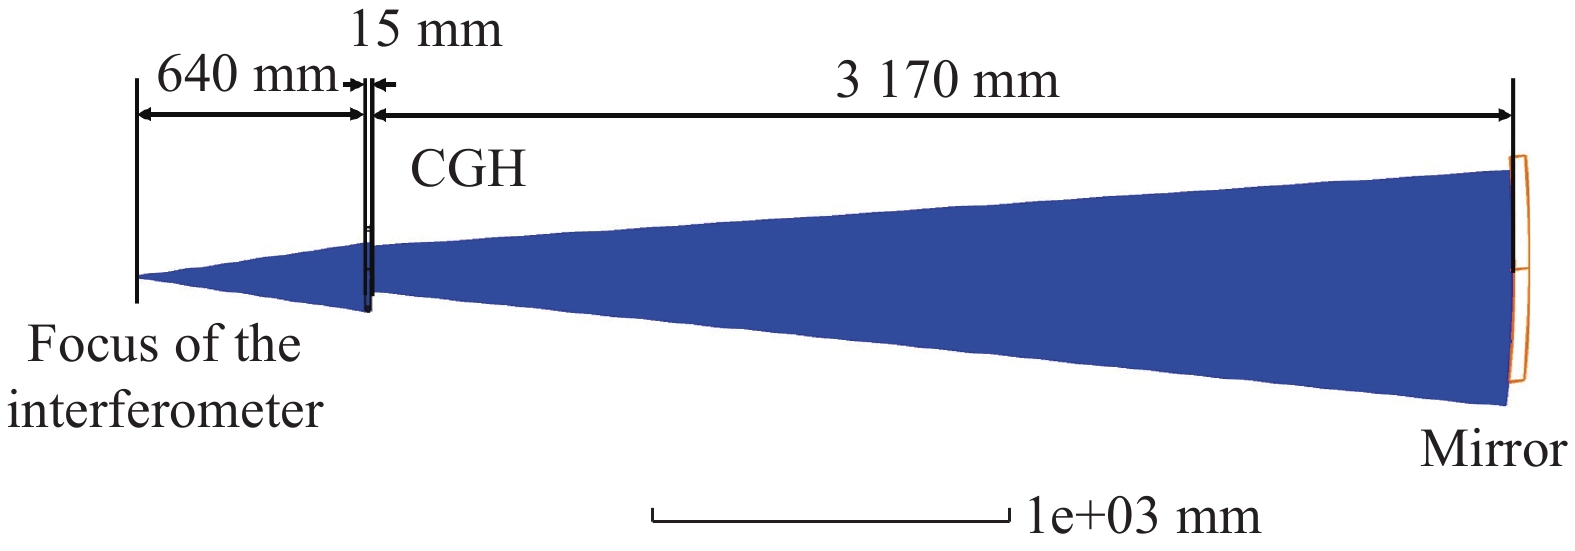 Optical path of off-axis aspheric surface interferometric testing by CGH